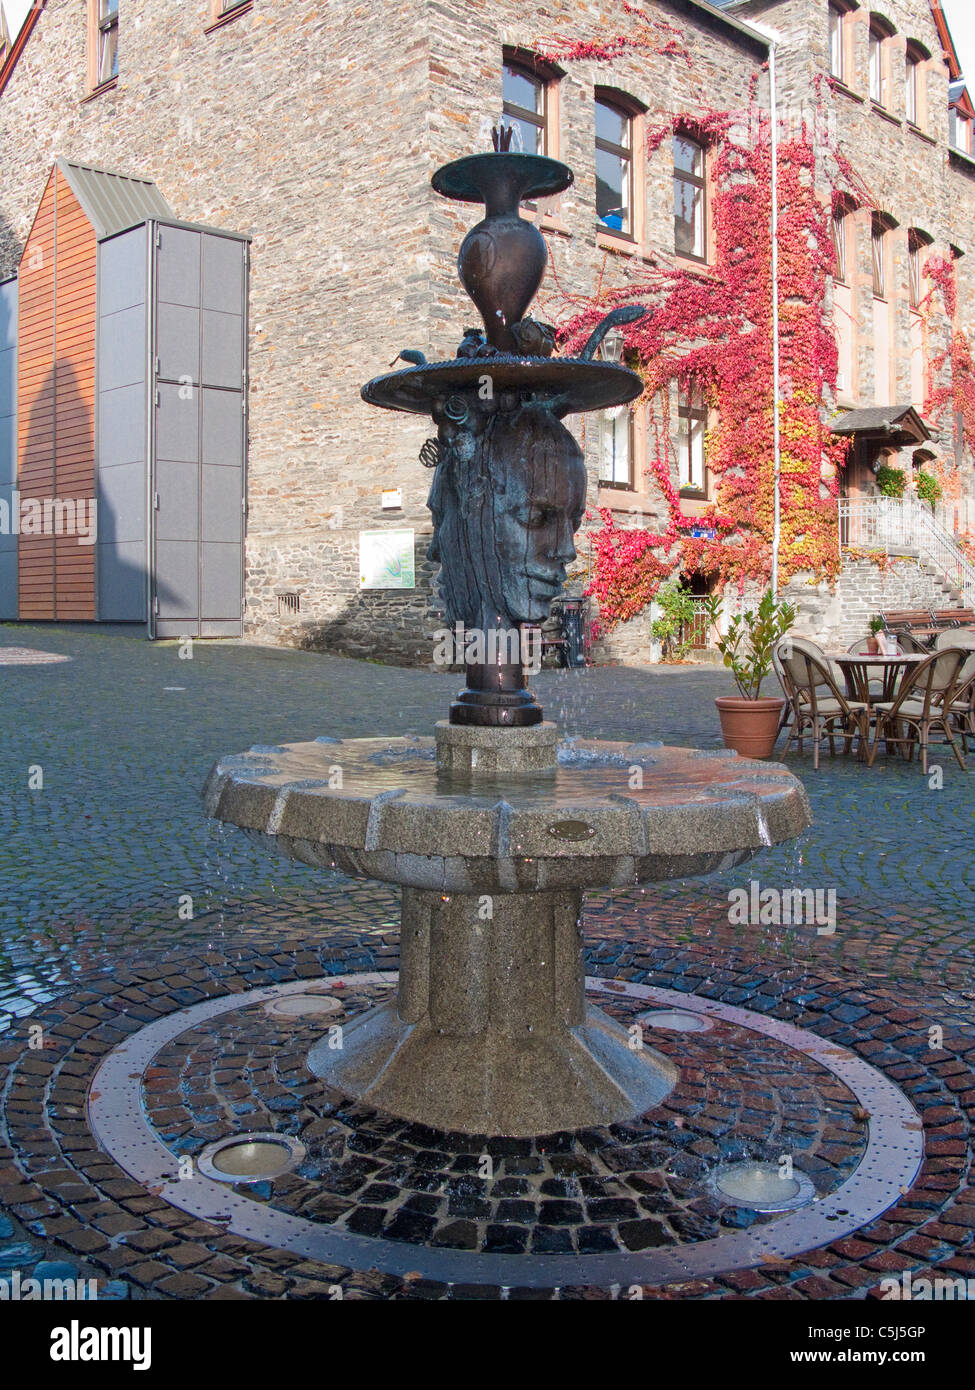 Brunnenfigur am Karlsbader Platz, Mosel, fountain at the Karlsbader square, Moselle Stock Photo